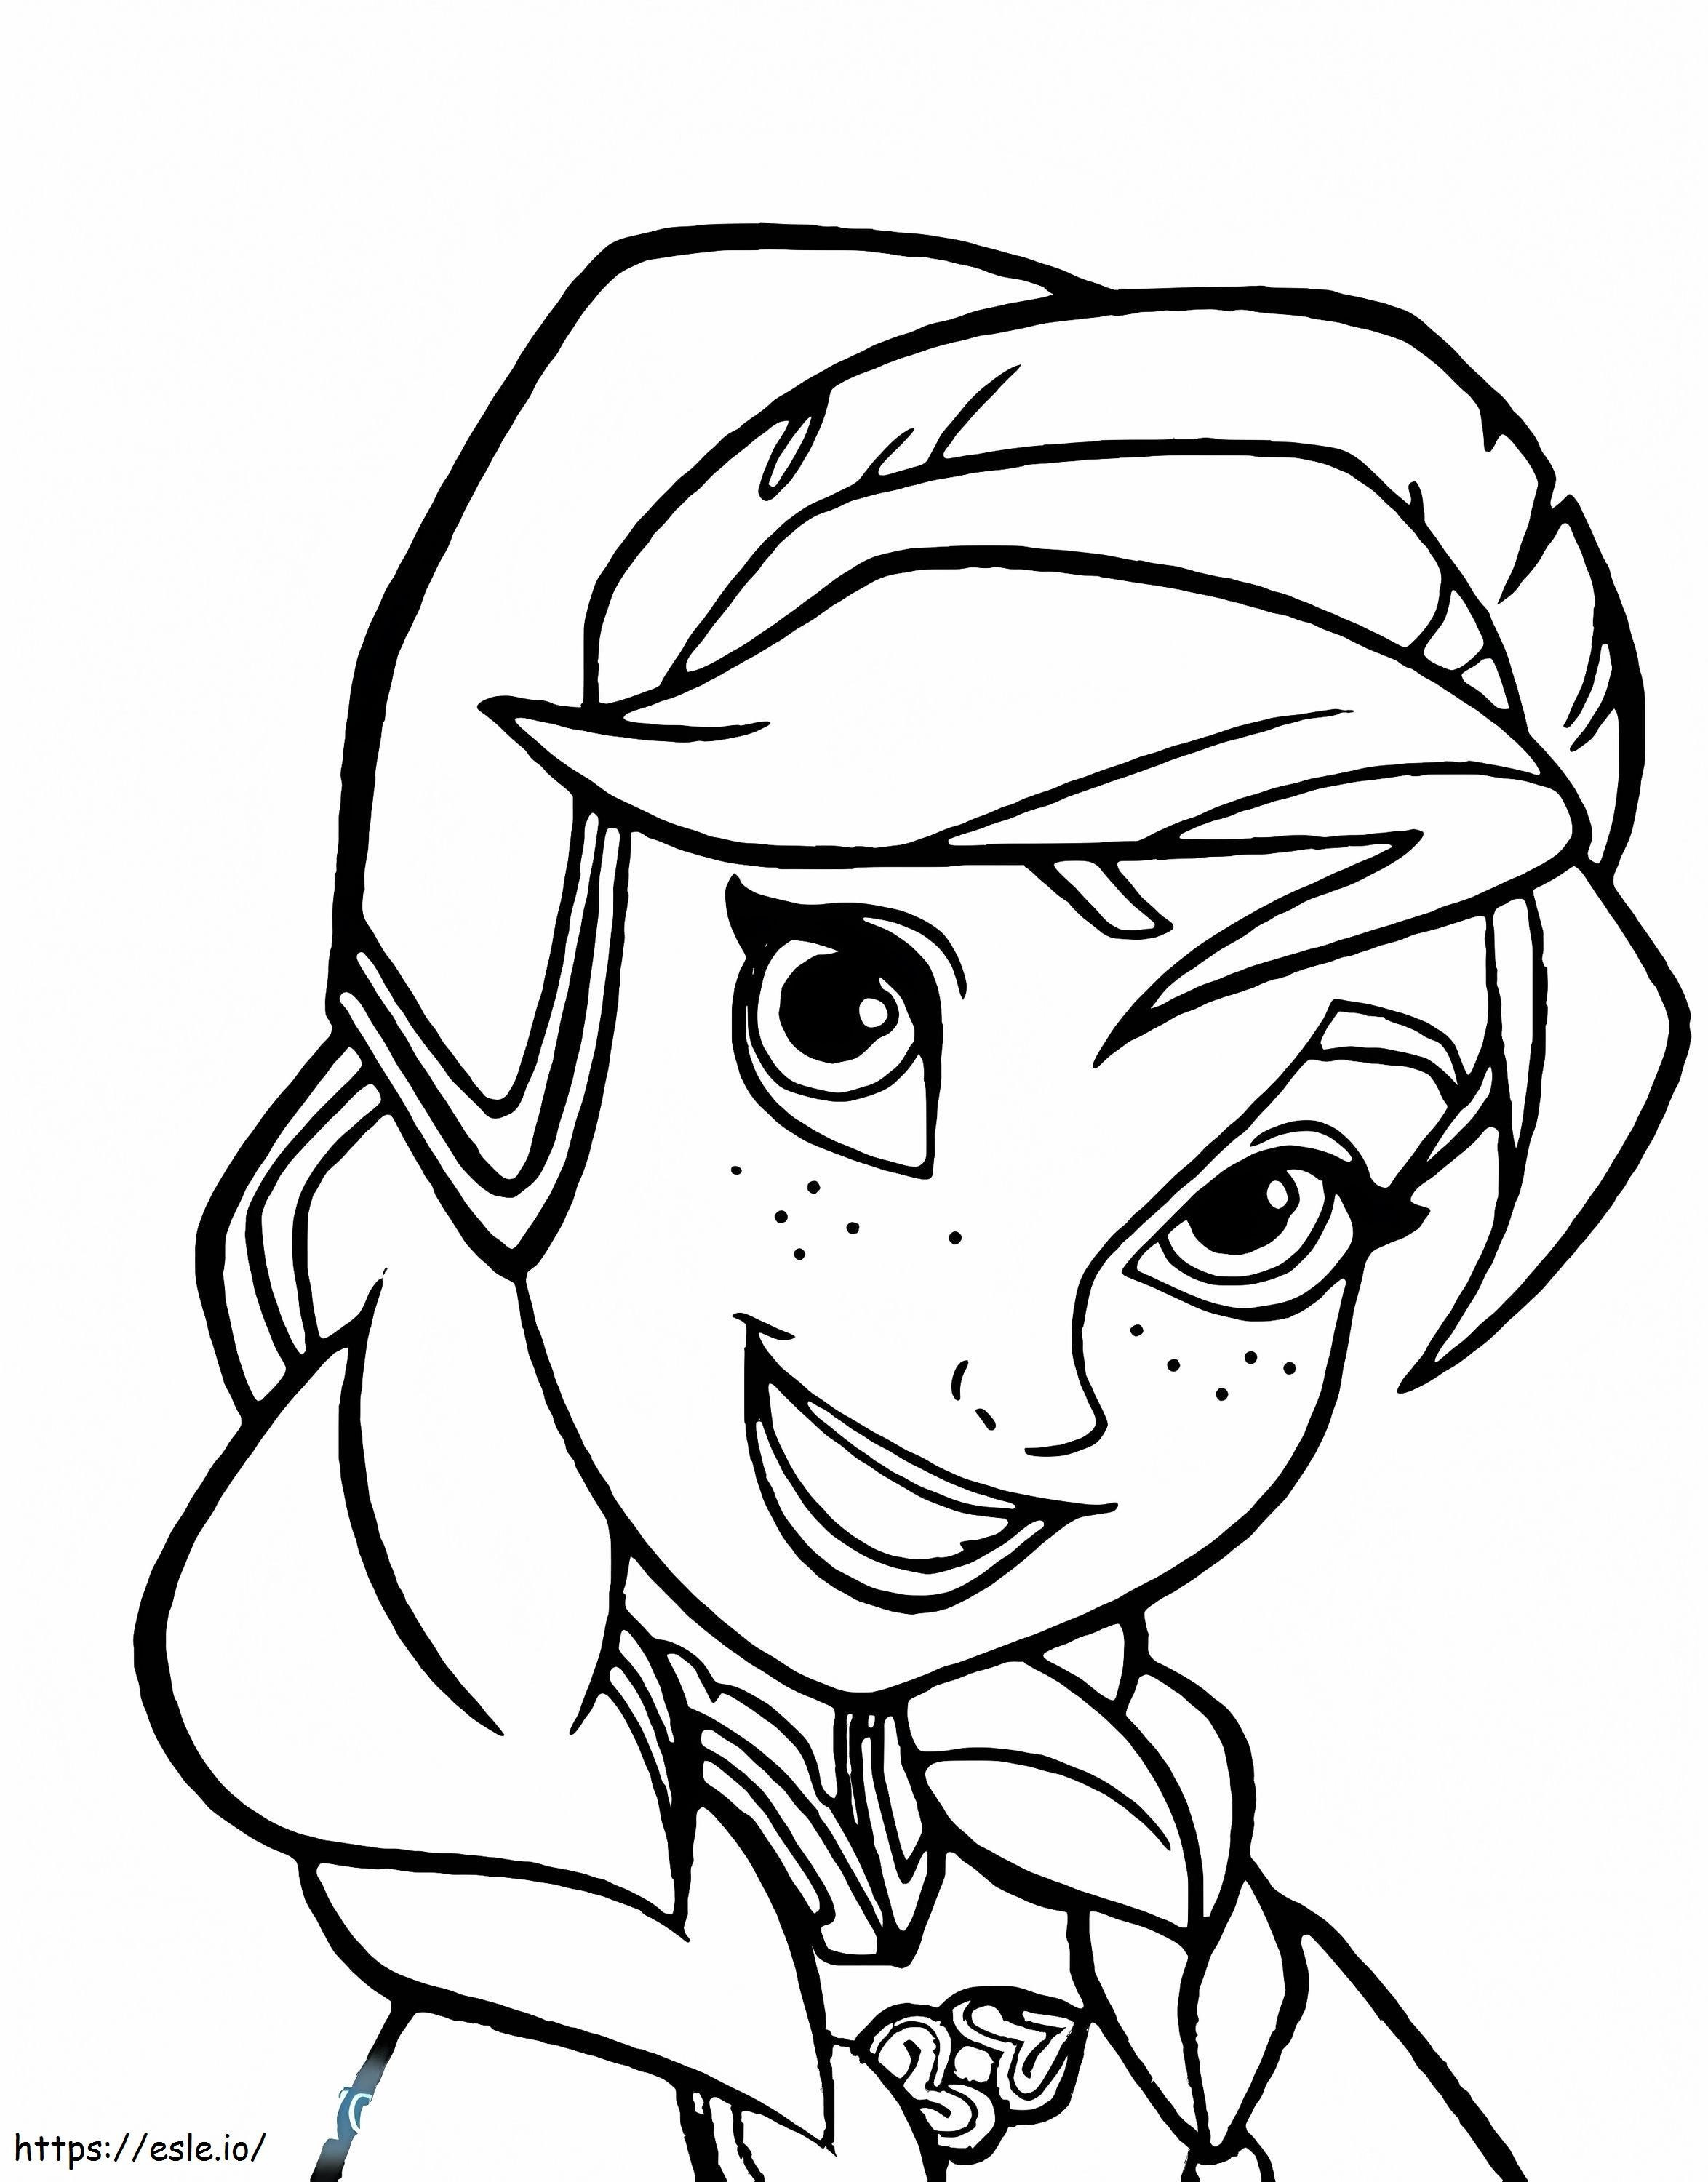 Anna Funny Face coloring page